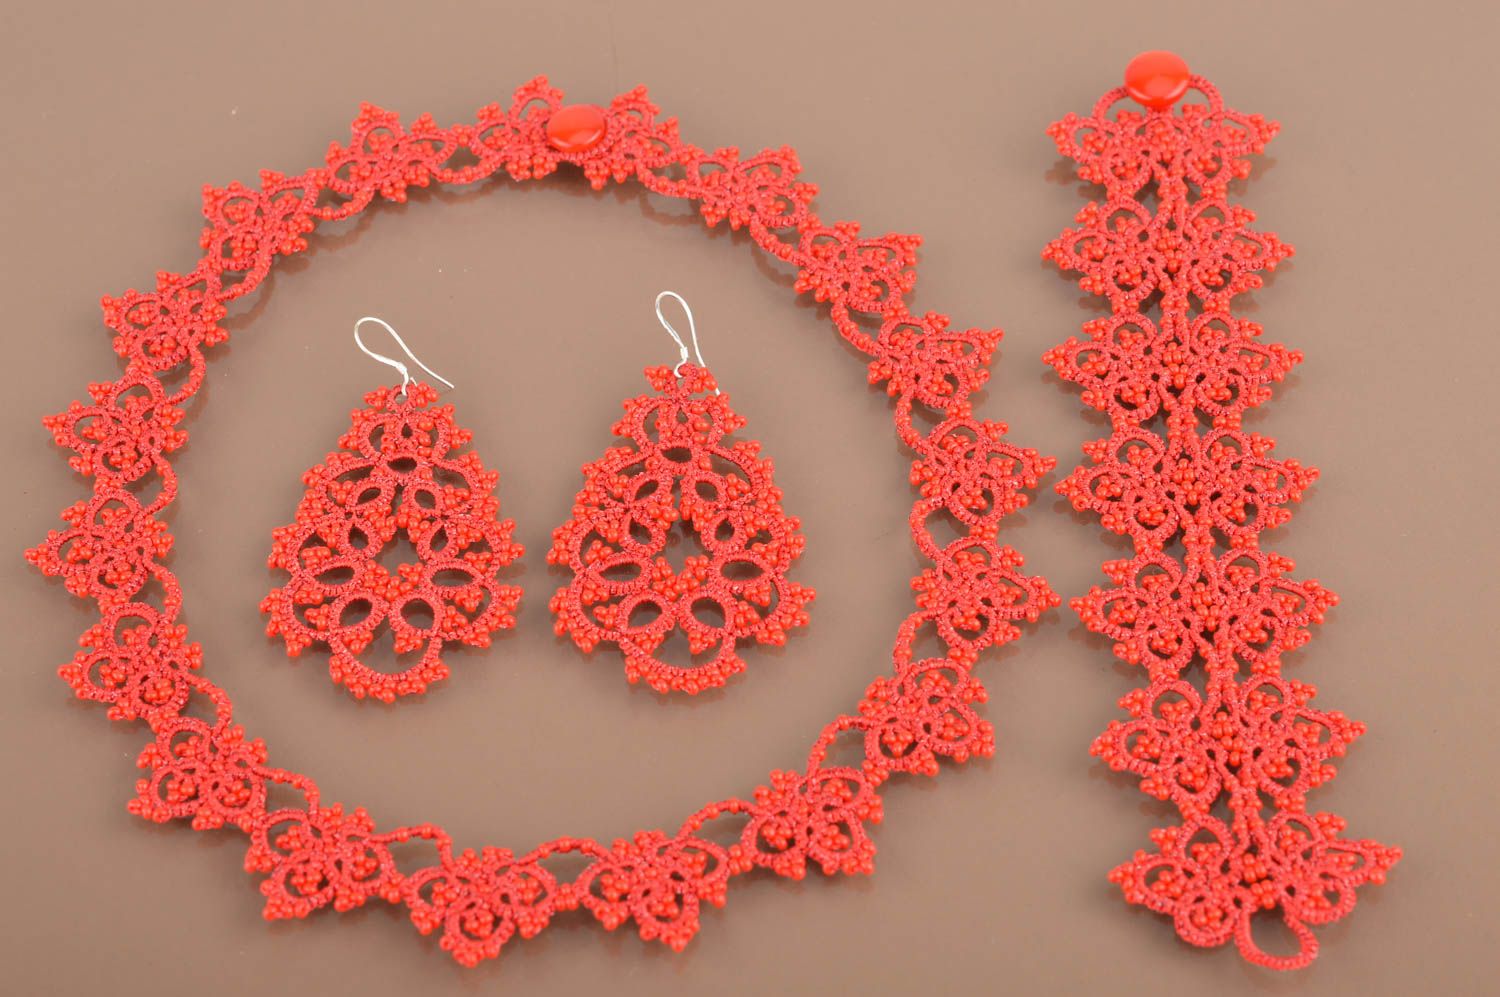 Handmade red lacy tatted jewelry set earrings bracelet and necklace 3 items photo 2